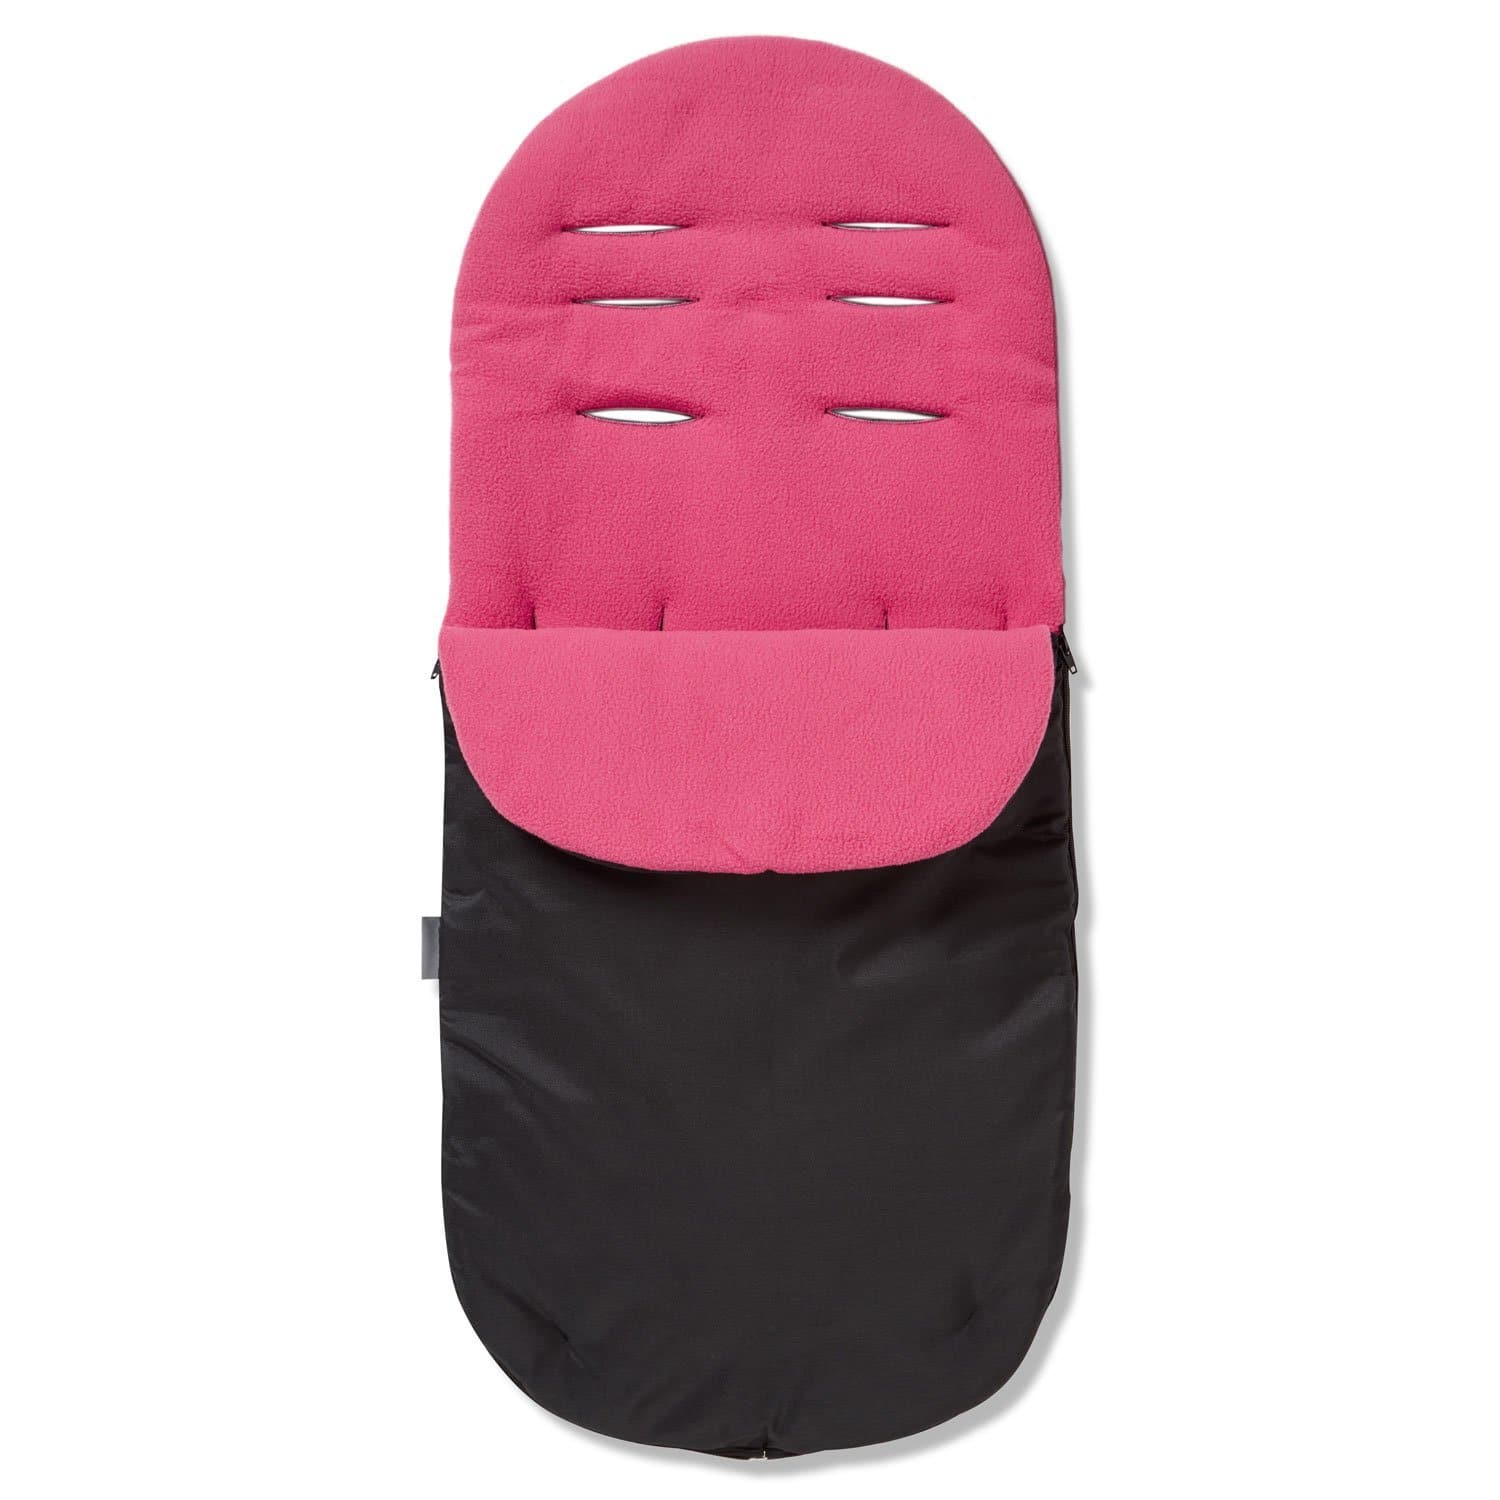 Footmuff / Cosy Toes Compatible with Looping - Dark Pink / Fits All Models | For Your Little One